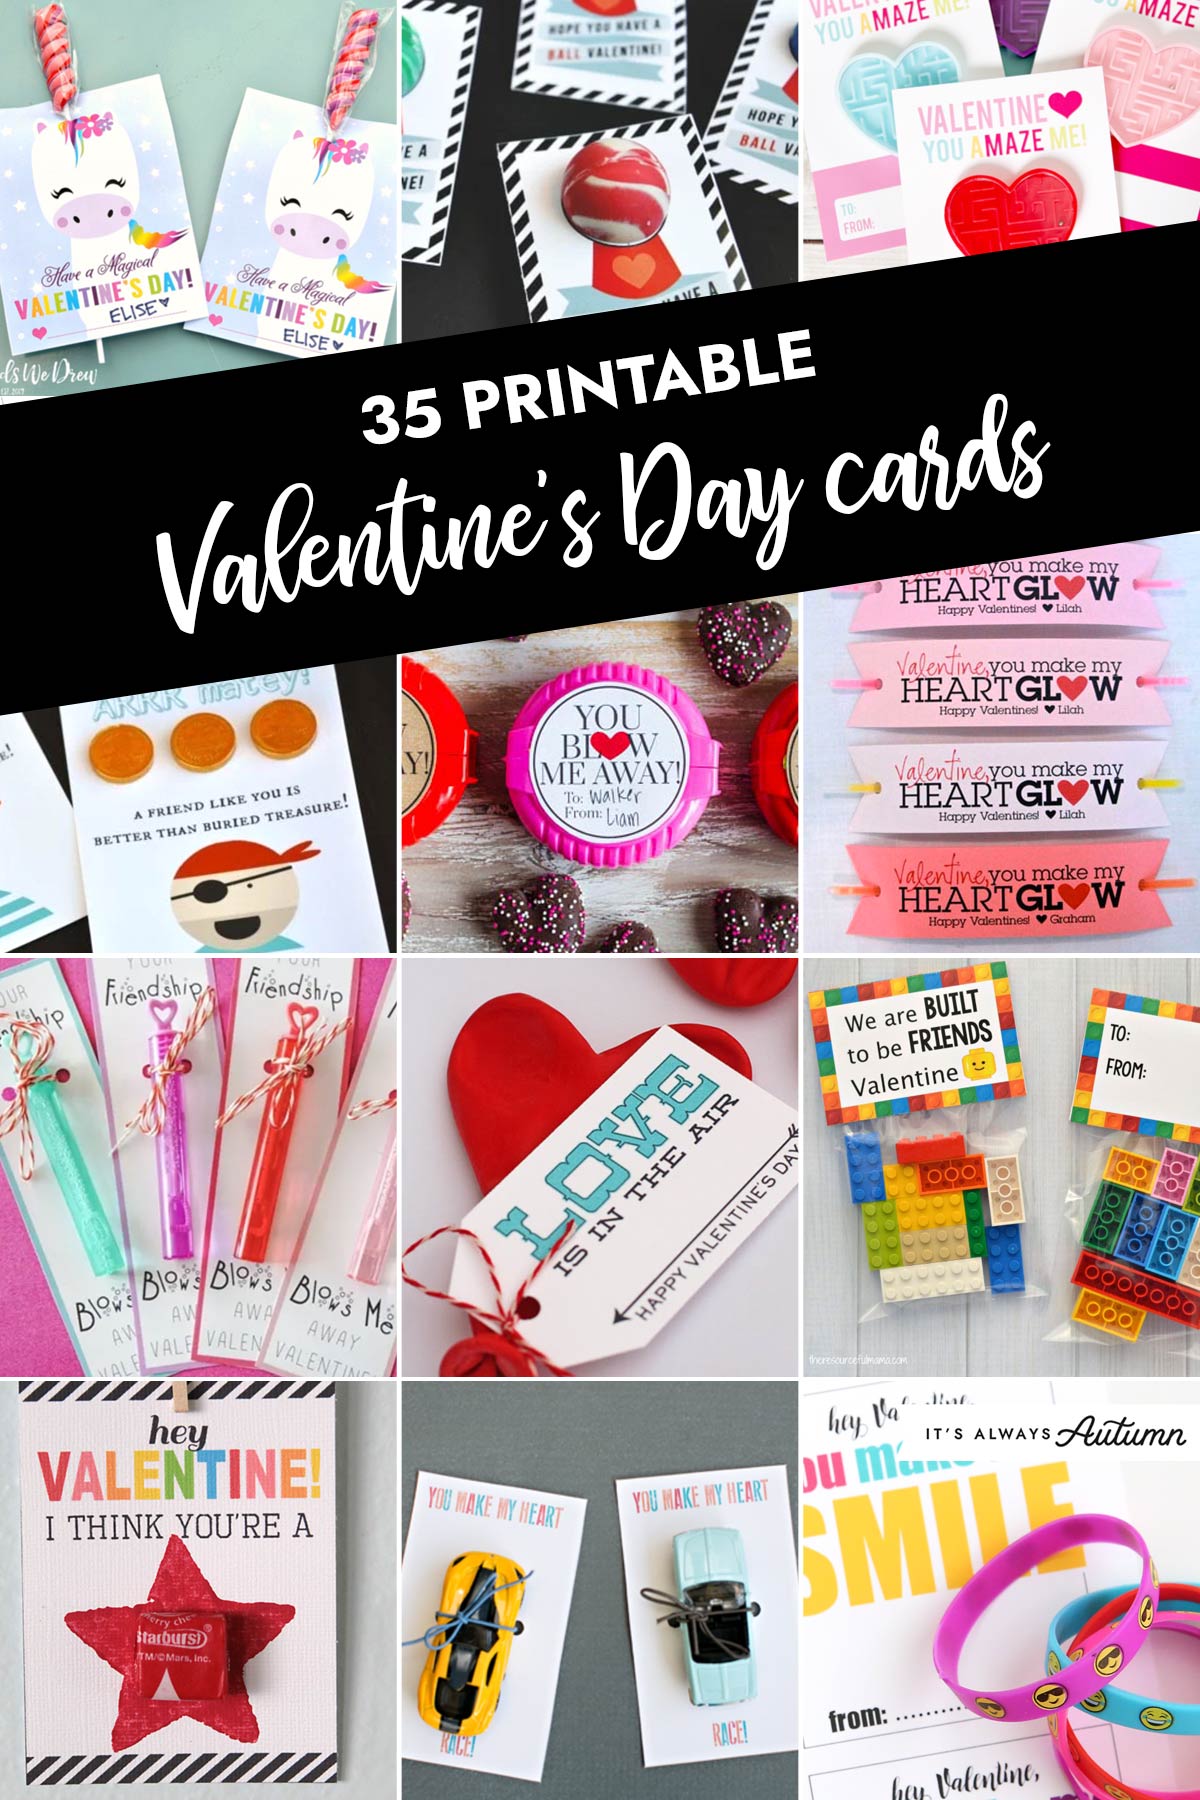 Printable Valentine Cards for Kids (FREE!) - Happy Strong Home